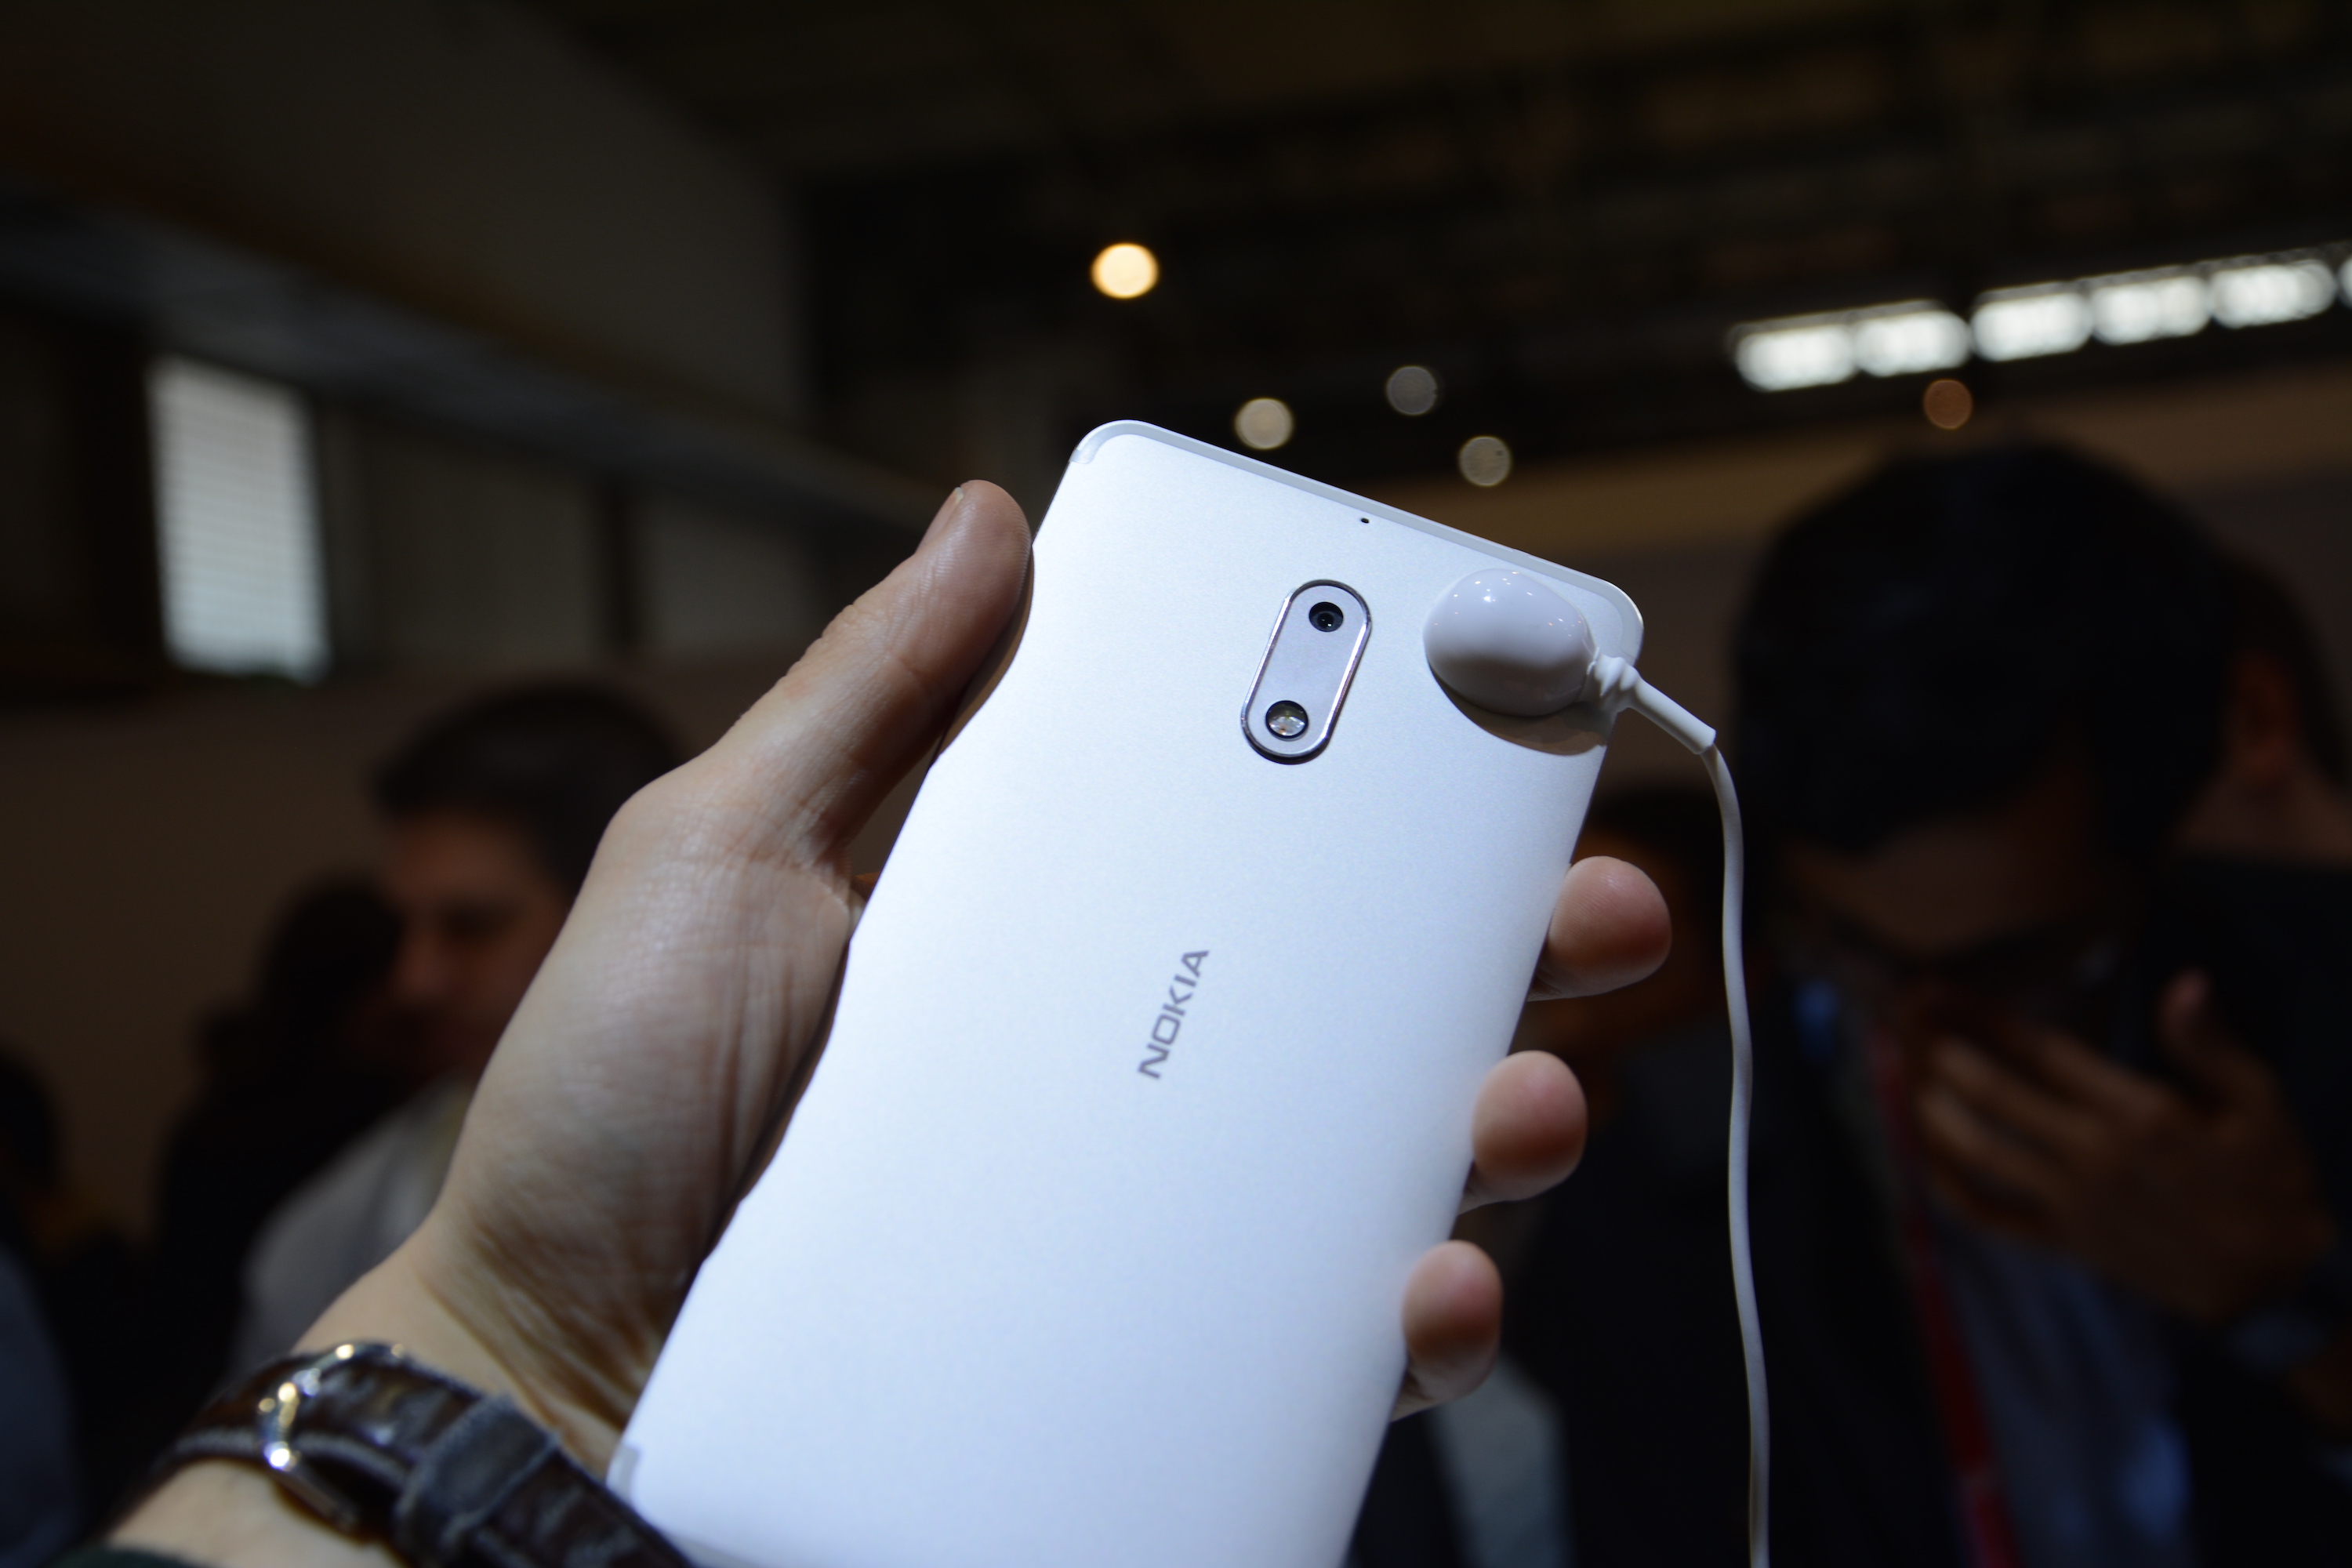 Nokia 6 the Successful comeback of Nokia to the Smartphones World